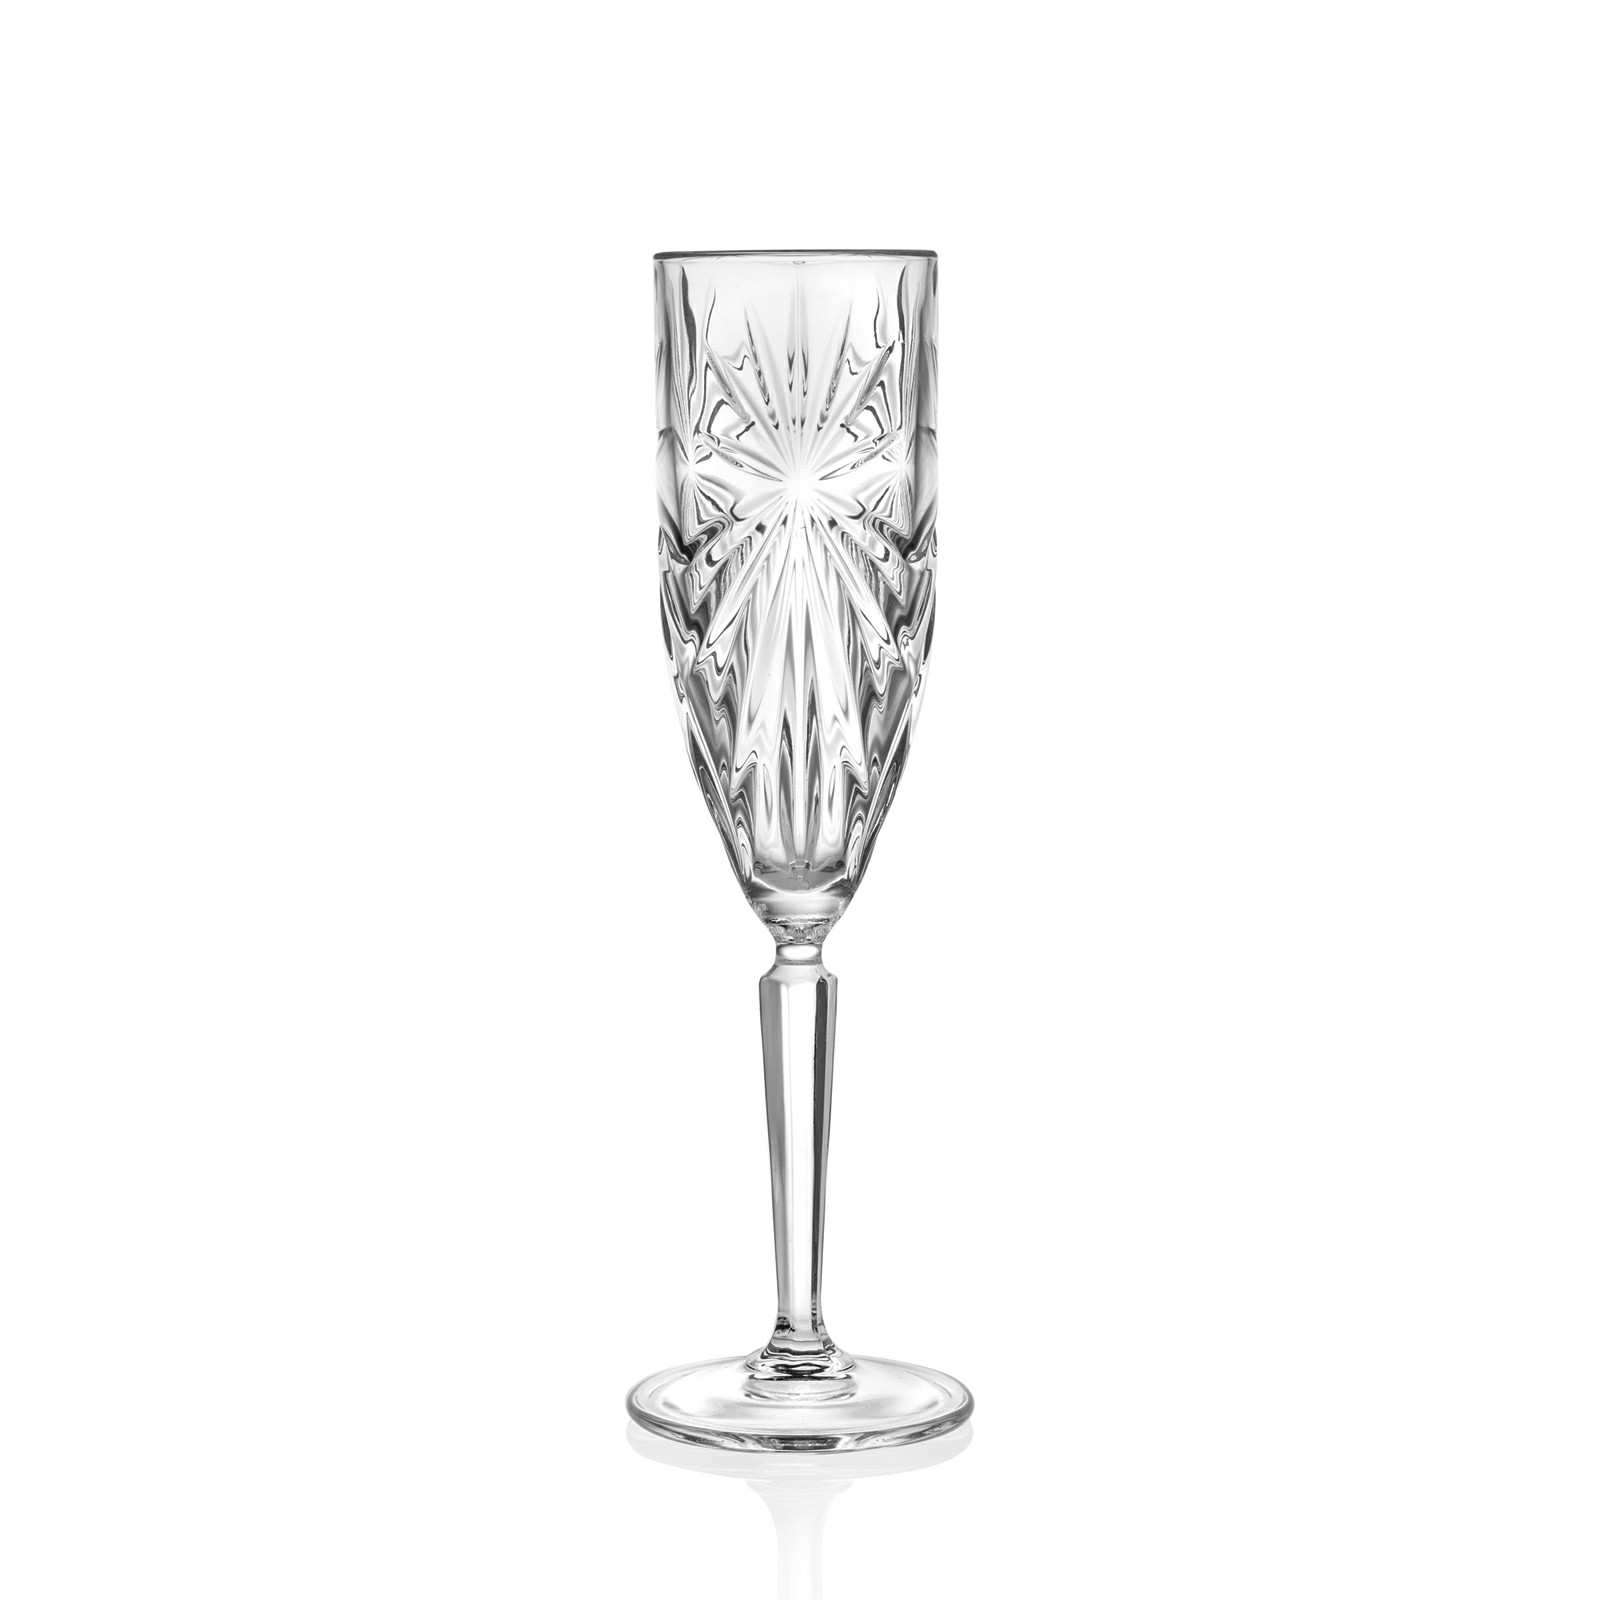 OASIS FLUTE CHAMPAGNE GLASS 16cl LUXION PROFESSIONAL ITALY